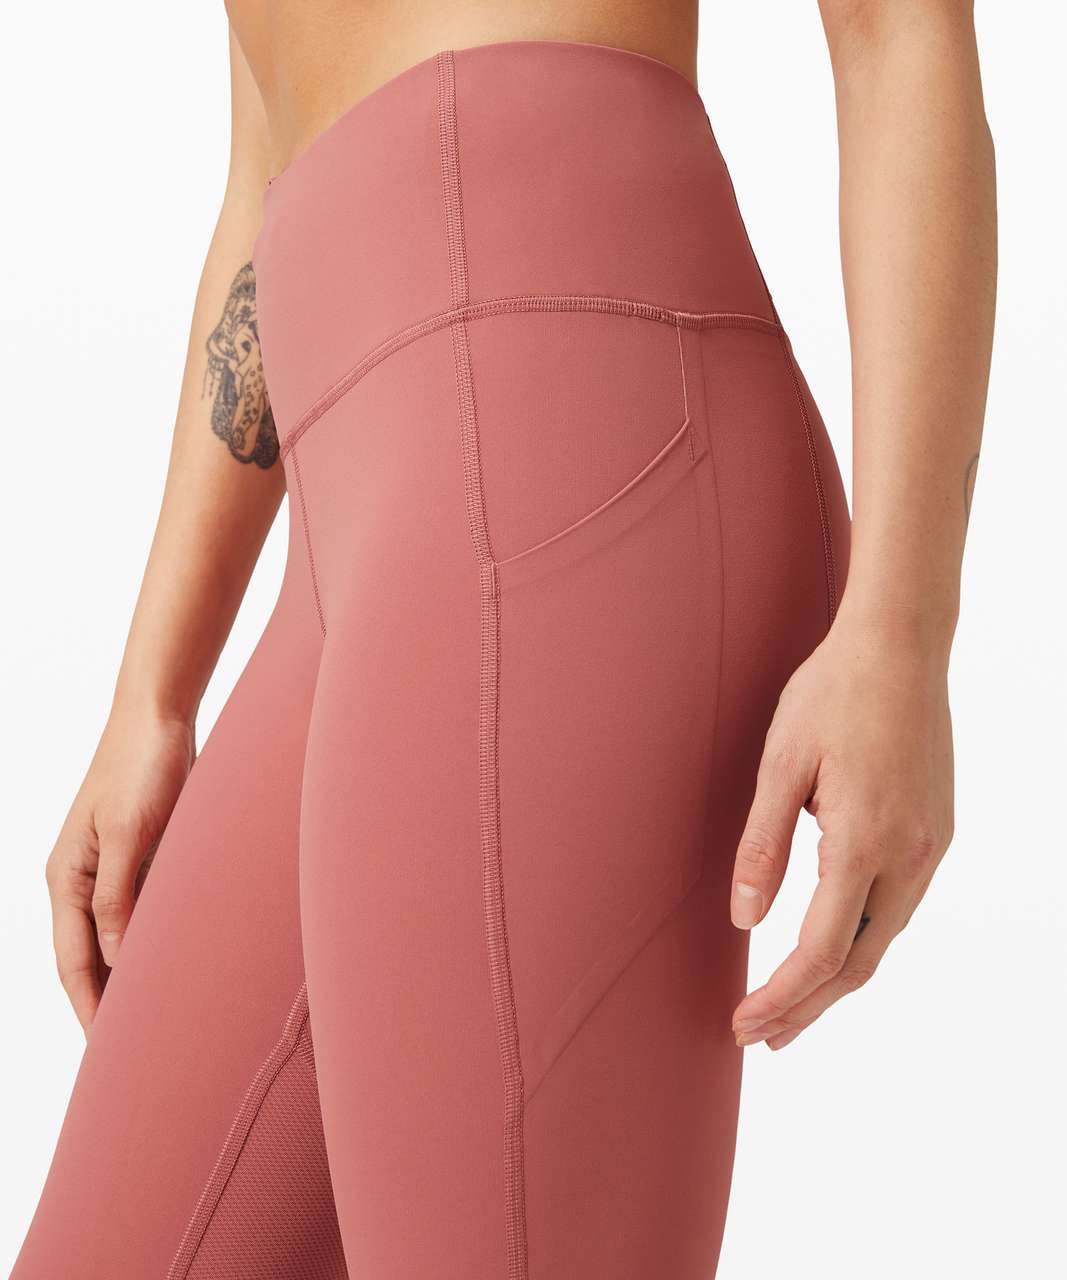 Lululemon Pace Rival High-Rise Crop 22" - Cherry Tint